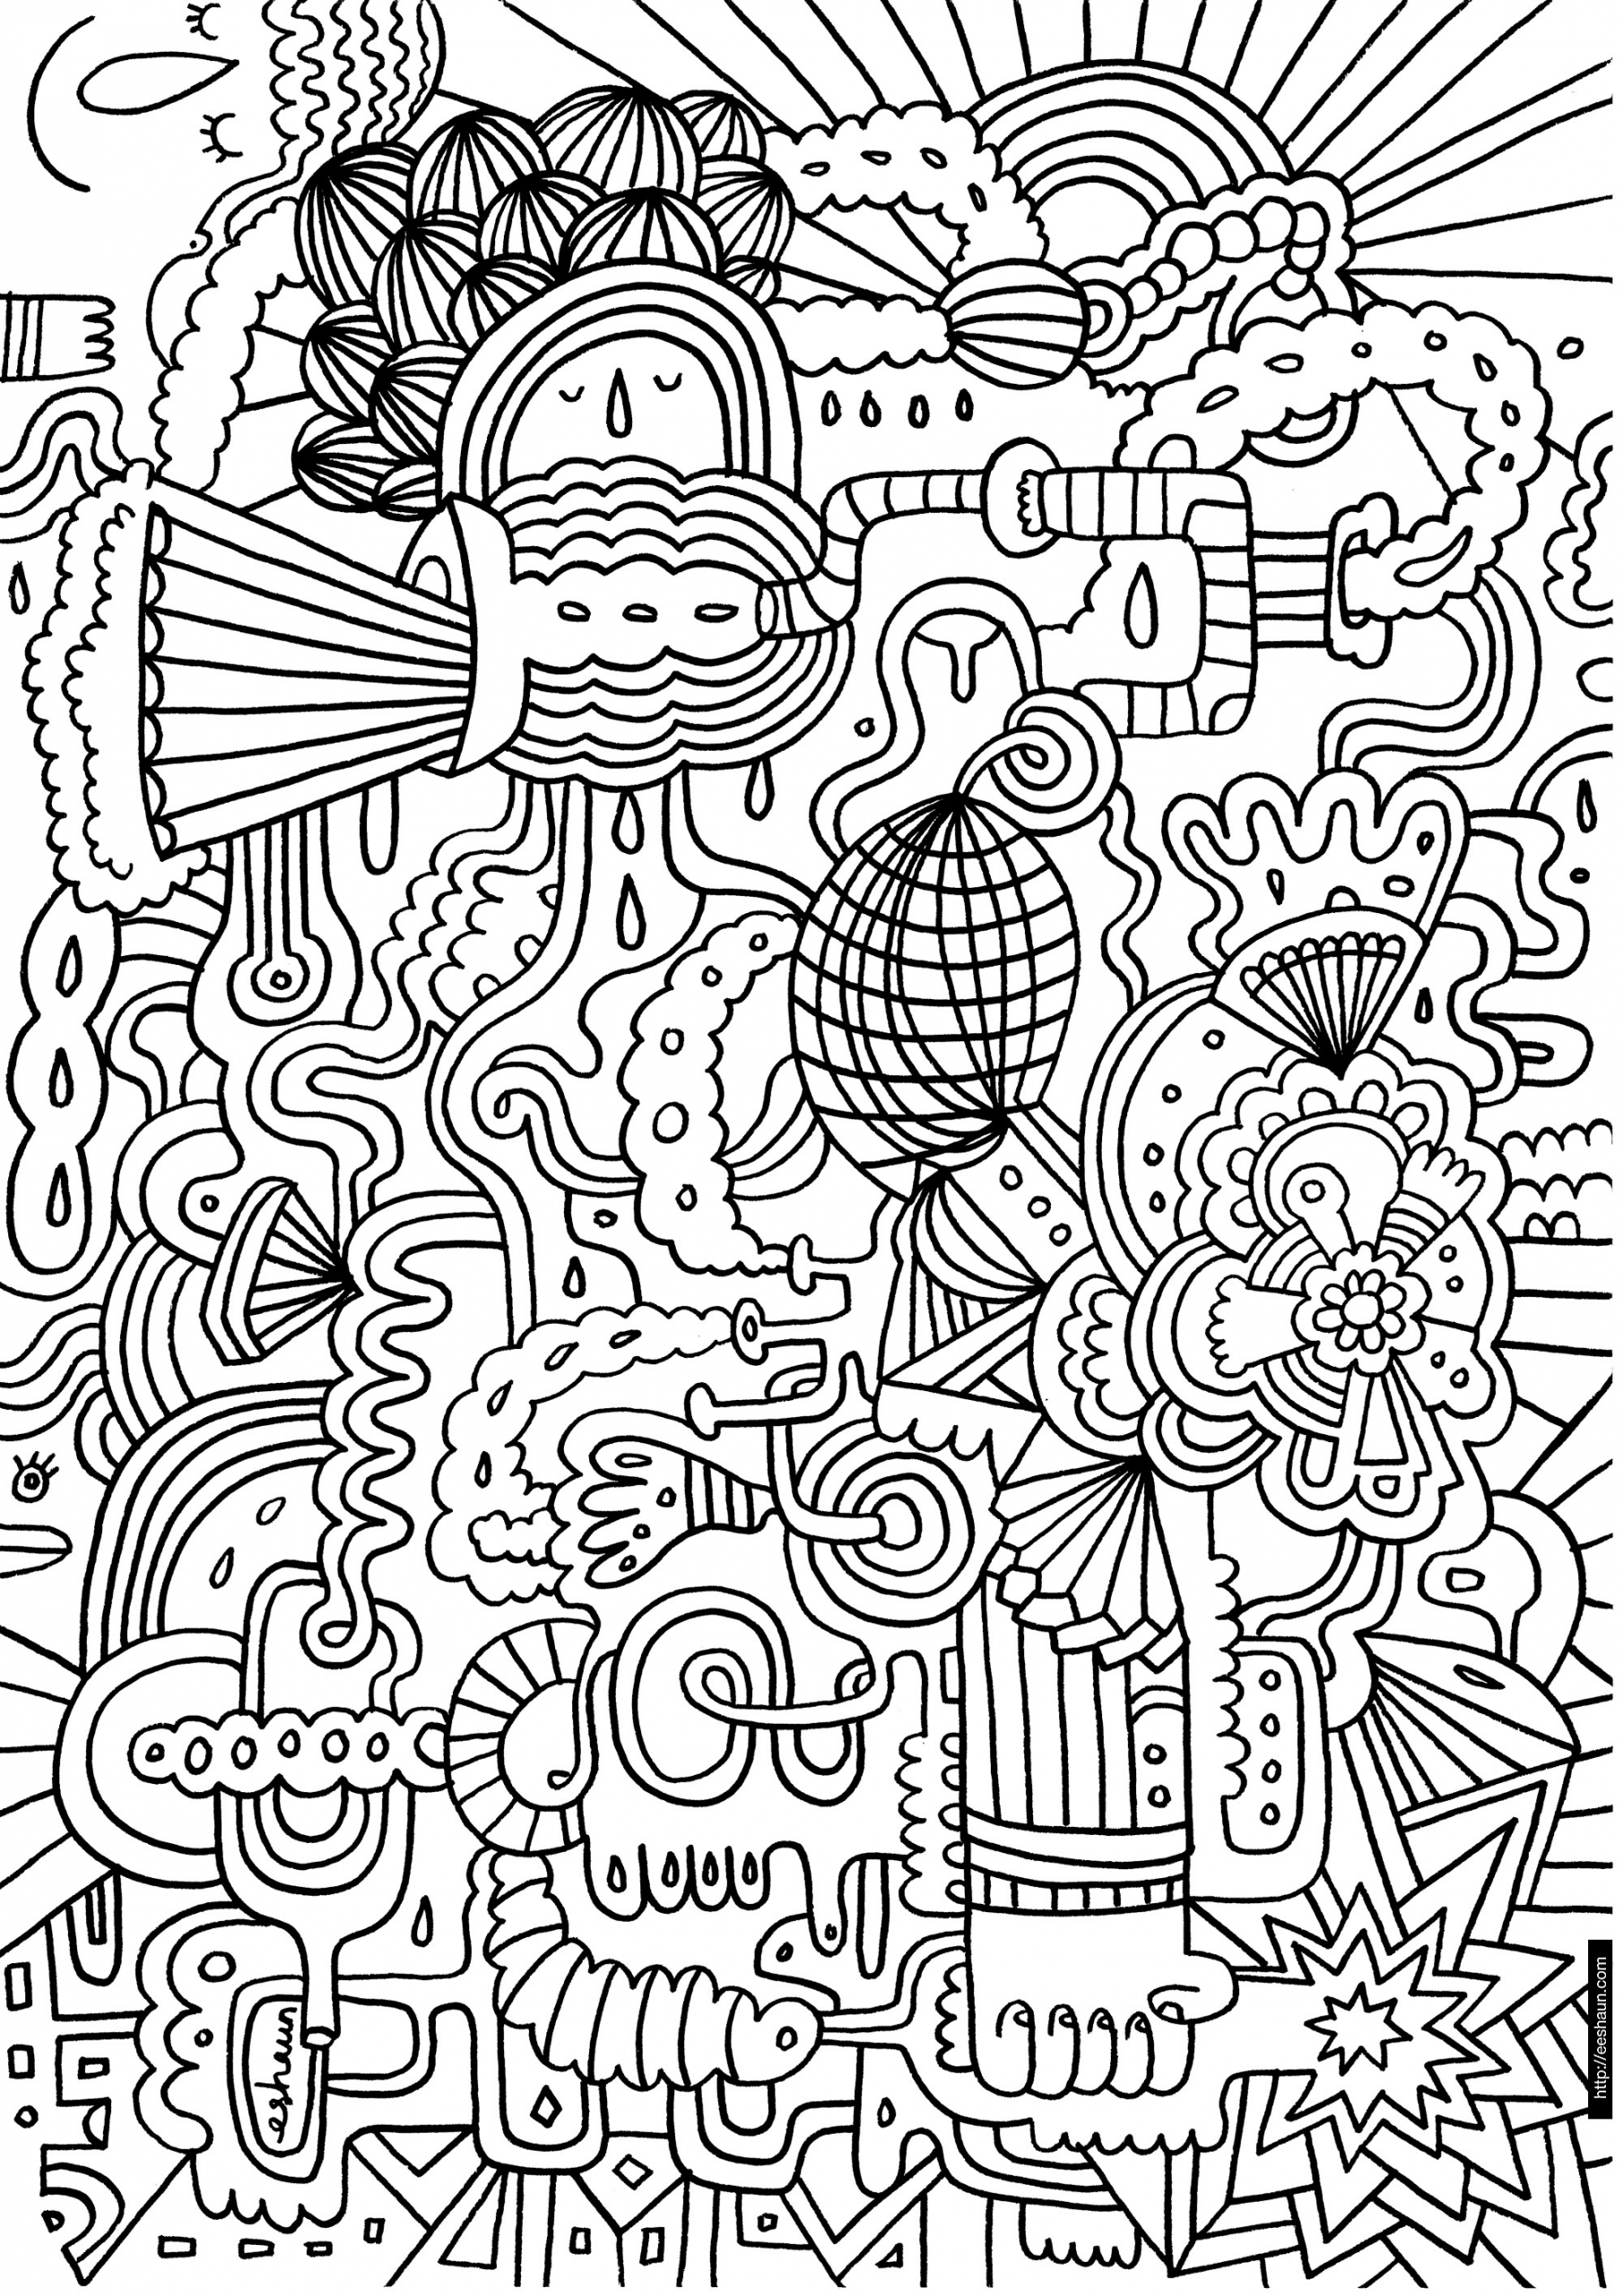 Coloring Pages For Adults Difficult
 hard coloring pages Free